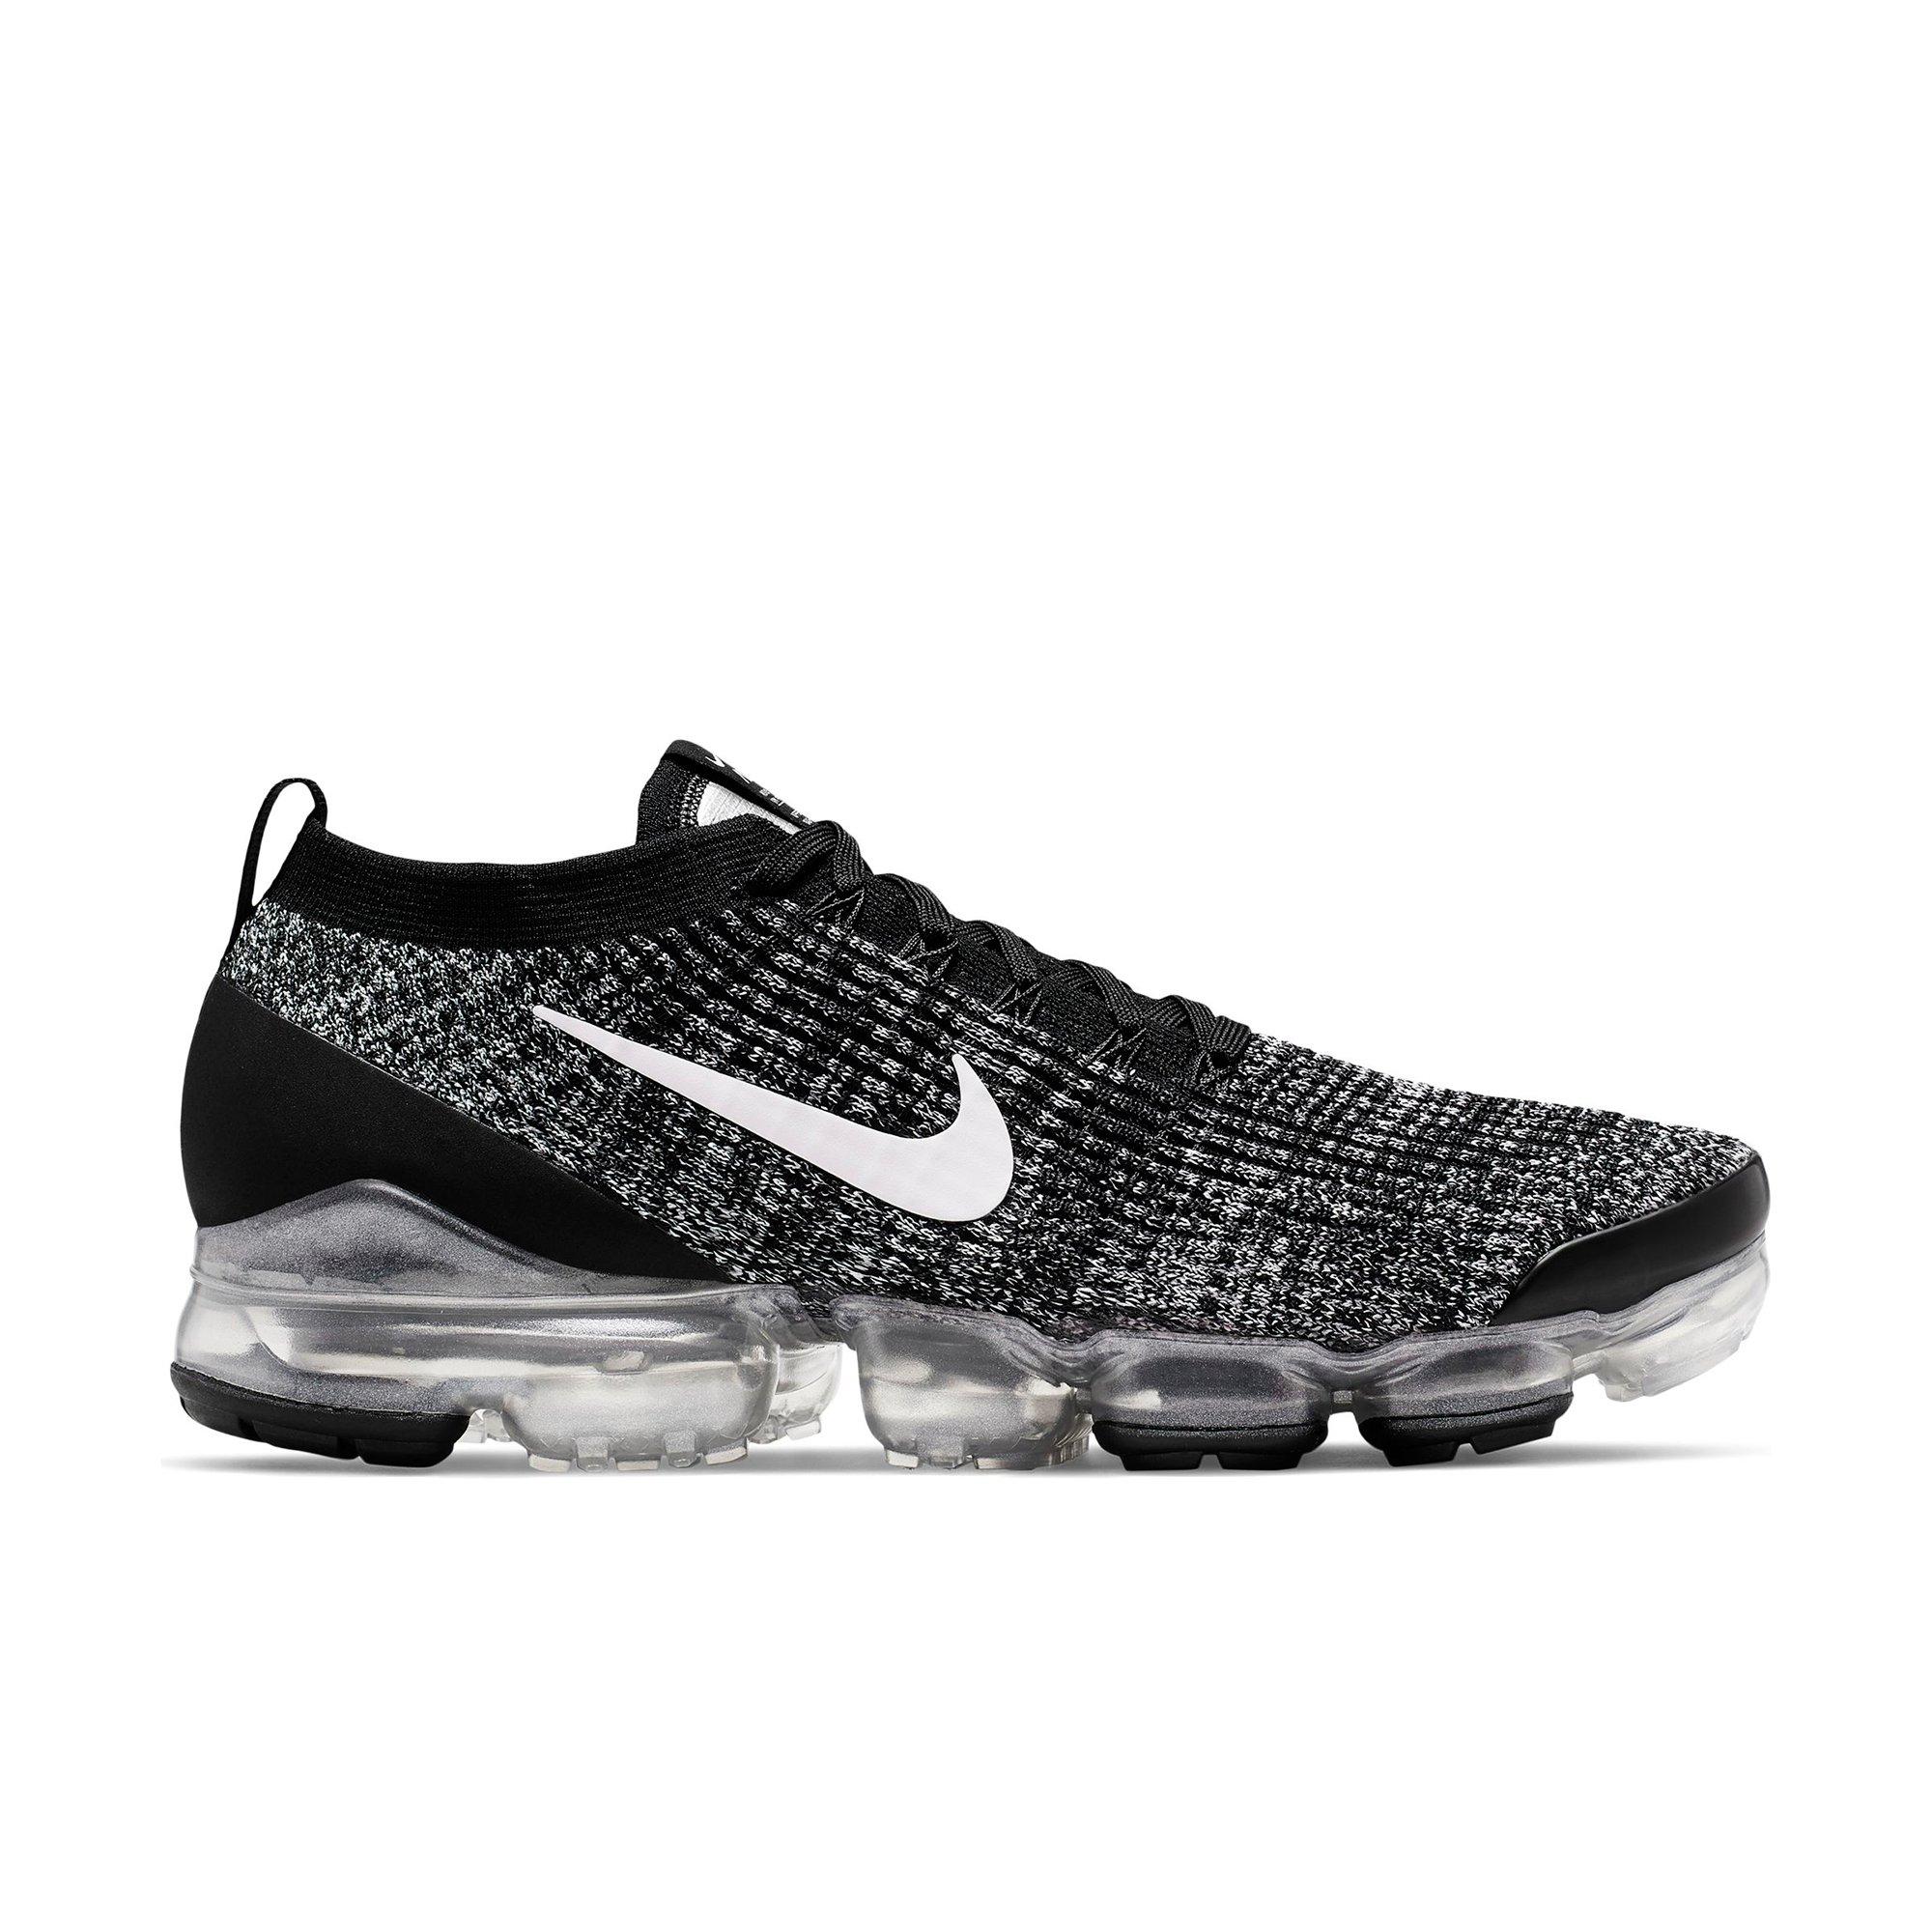 black and silver vapormax